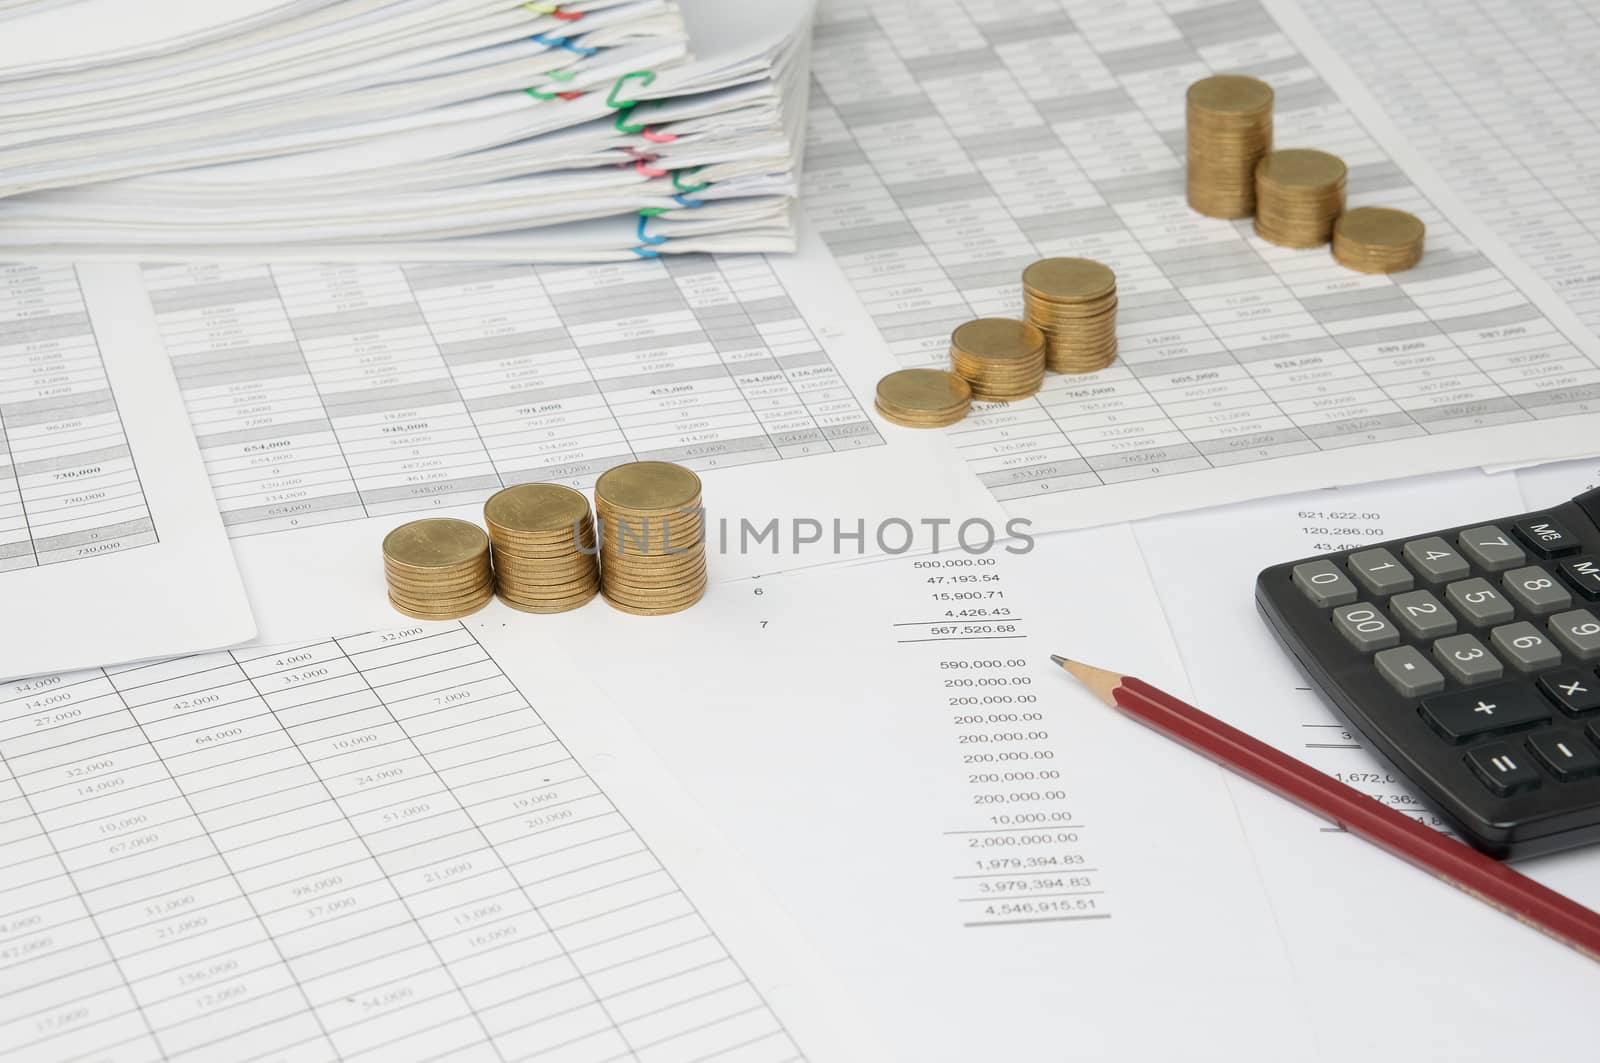 Brown pencil and calculator with step pile of gold coins on the statement finance account have blur overload of paperwork with colorful paperclip as background.